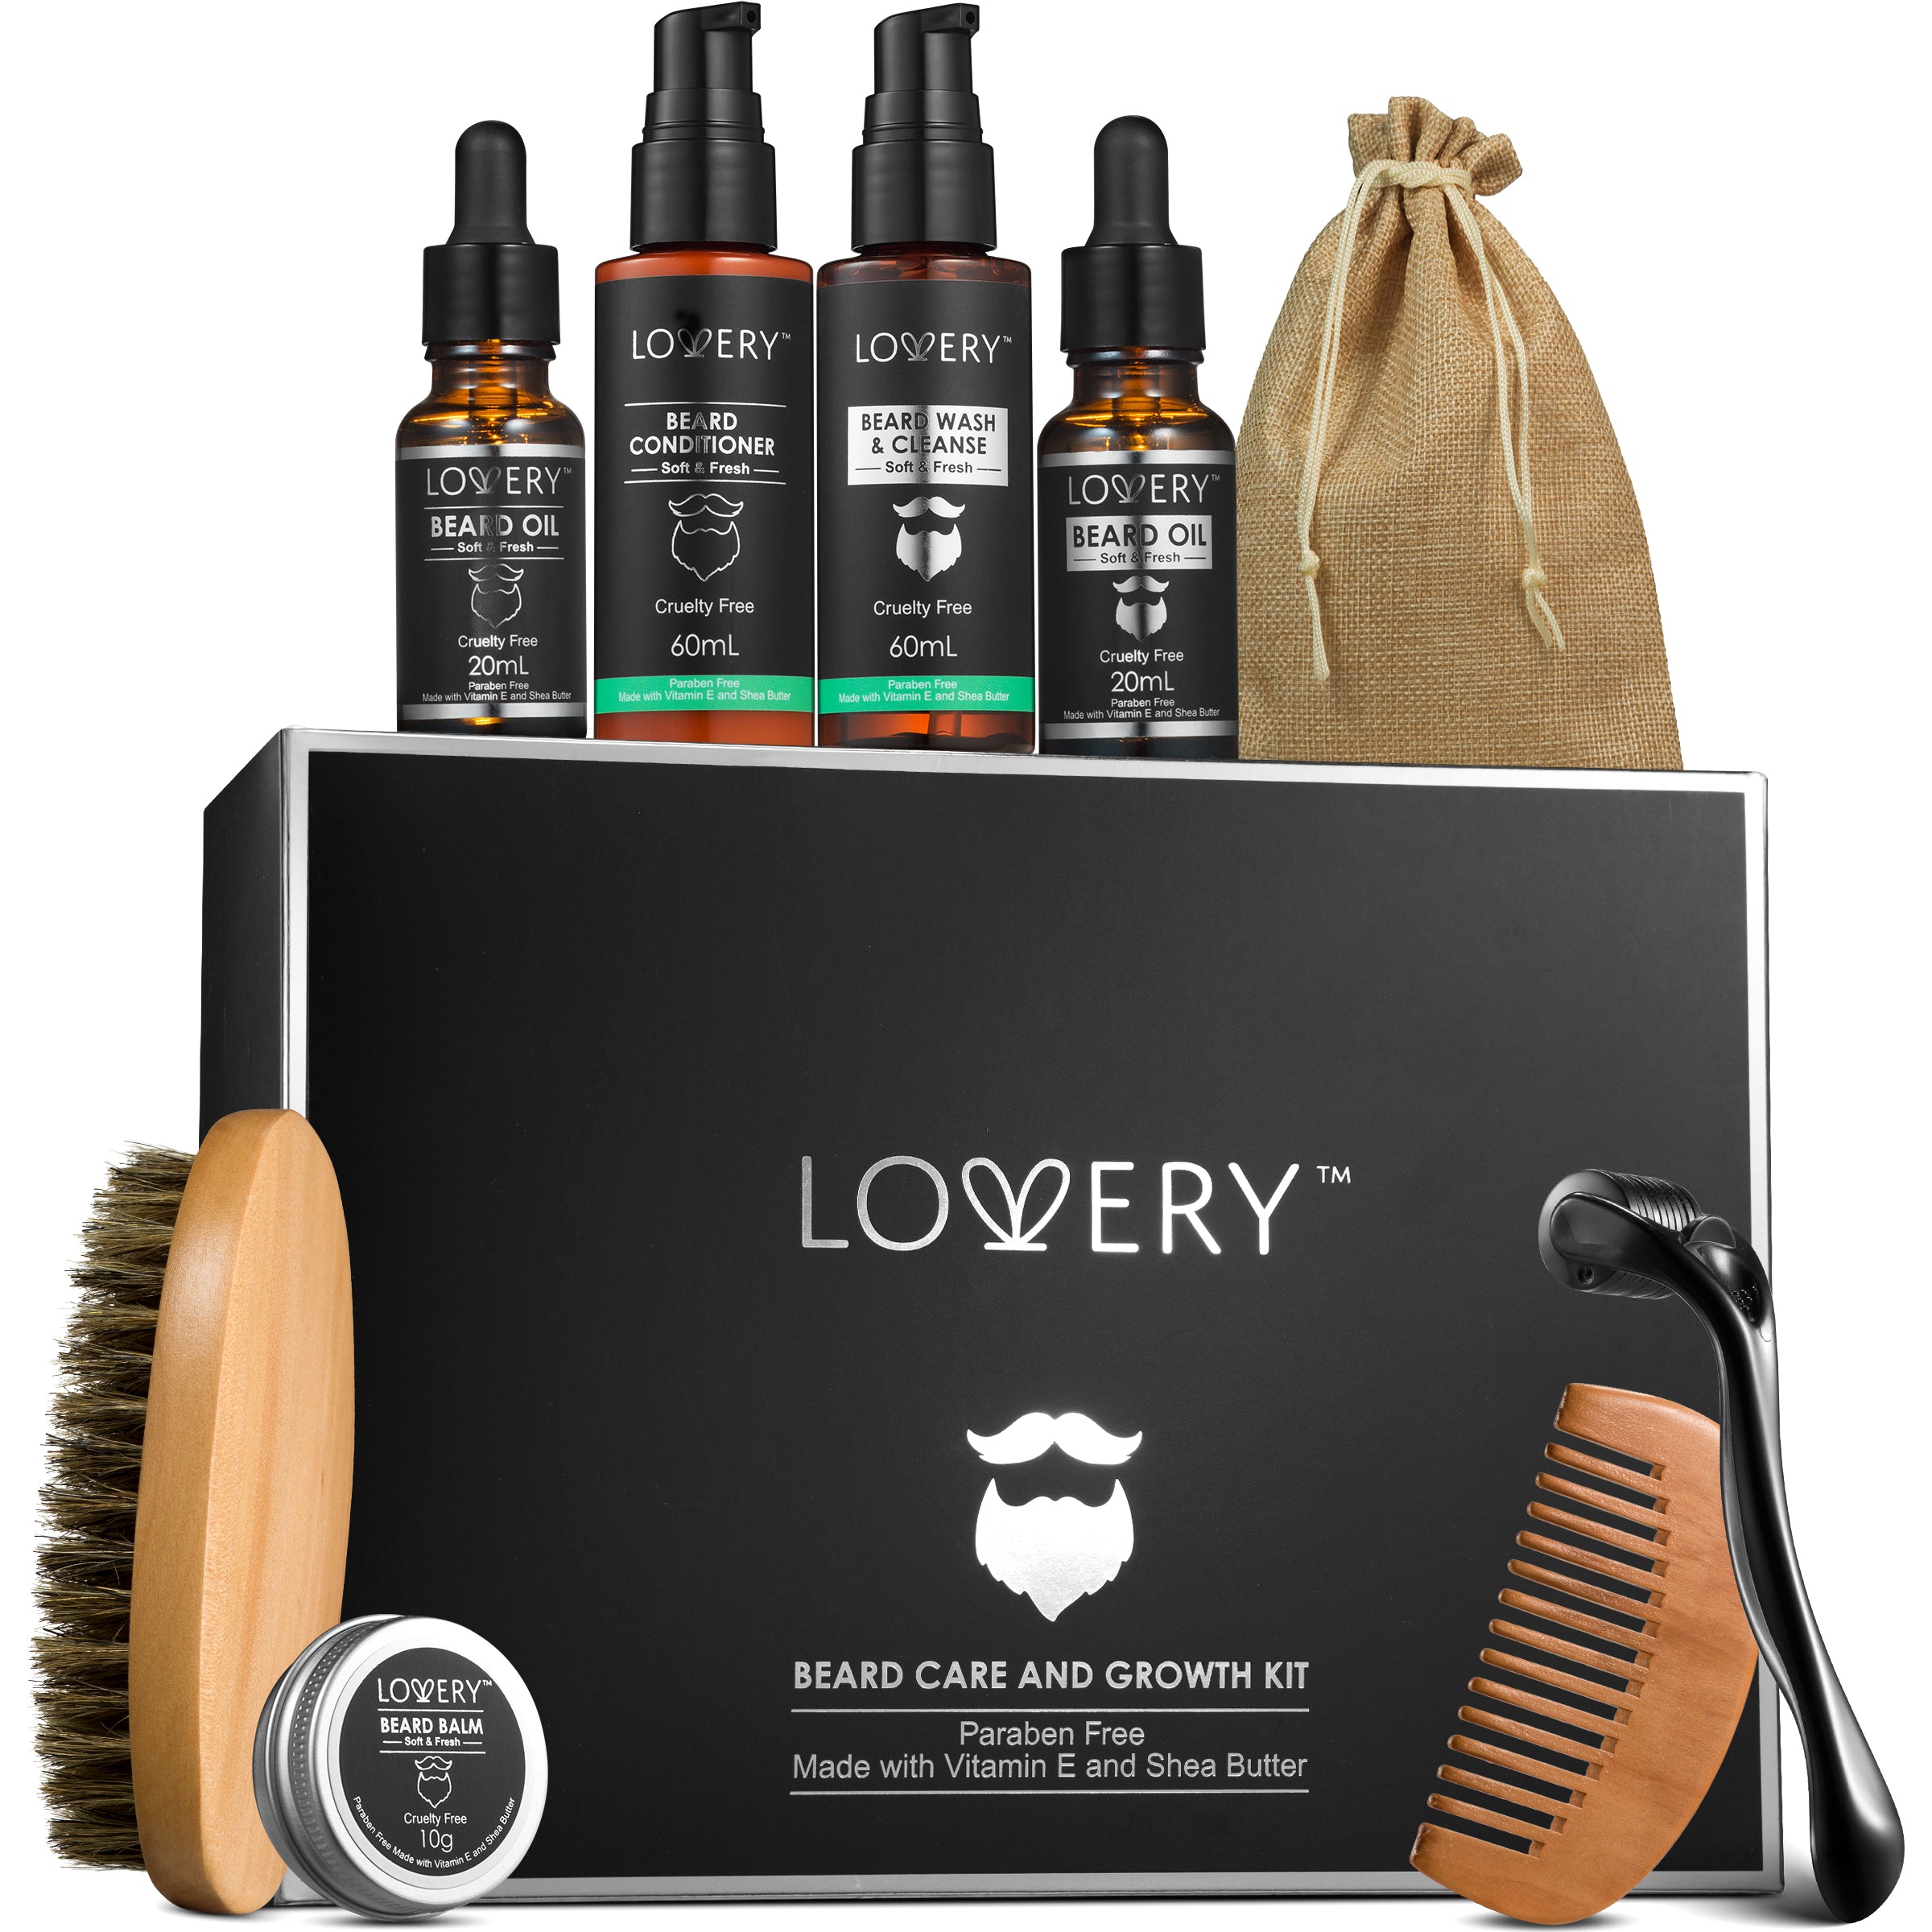 Men's Personal Care Products | Buy Grooming Gift Hamper for Him